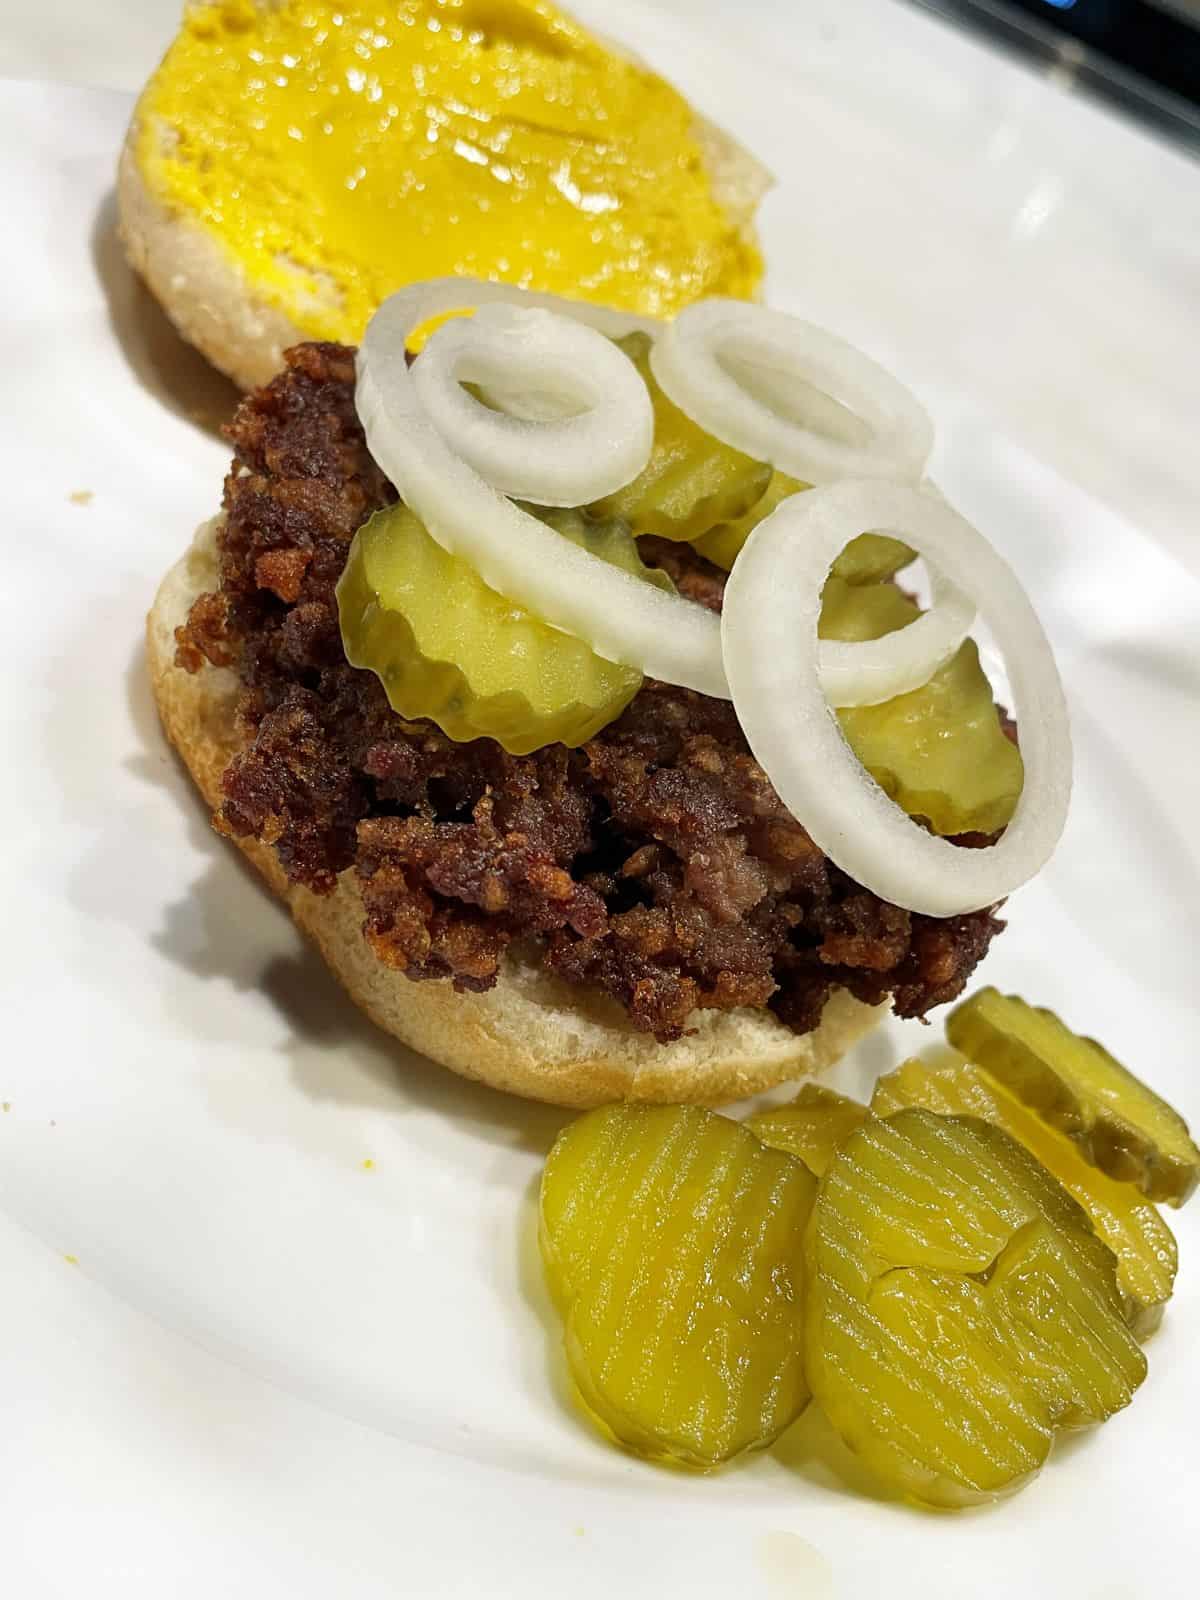 slugburger on a bun with pickles and onion with the top bun in the back has mustard on it and more pickles on the side